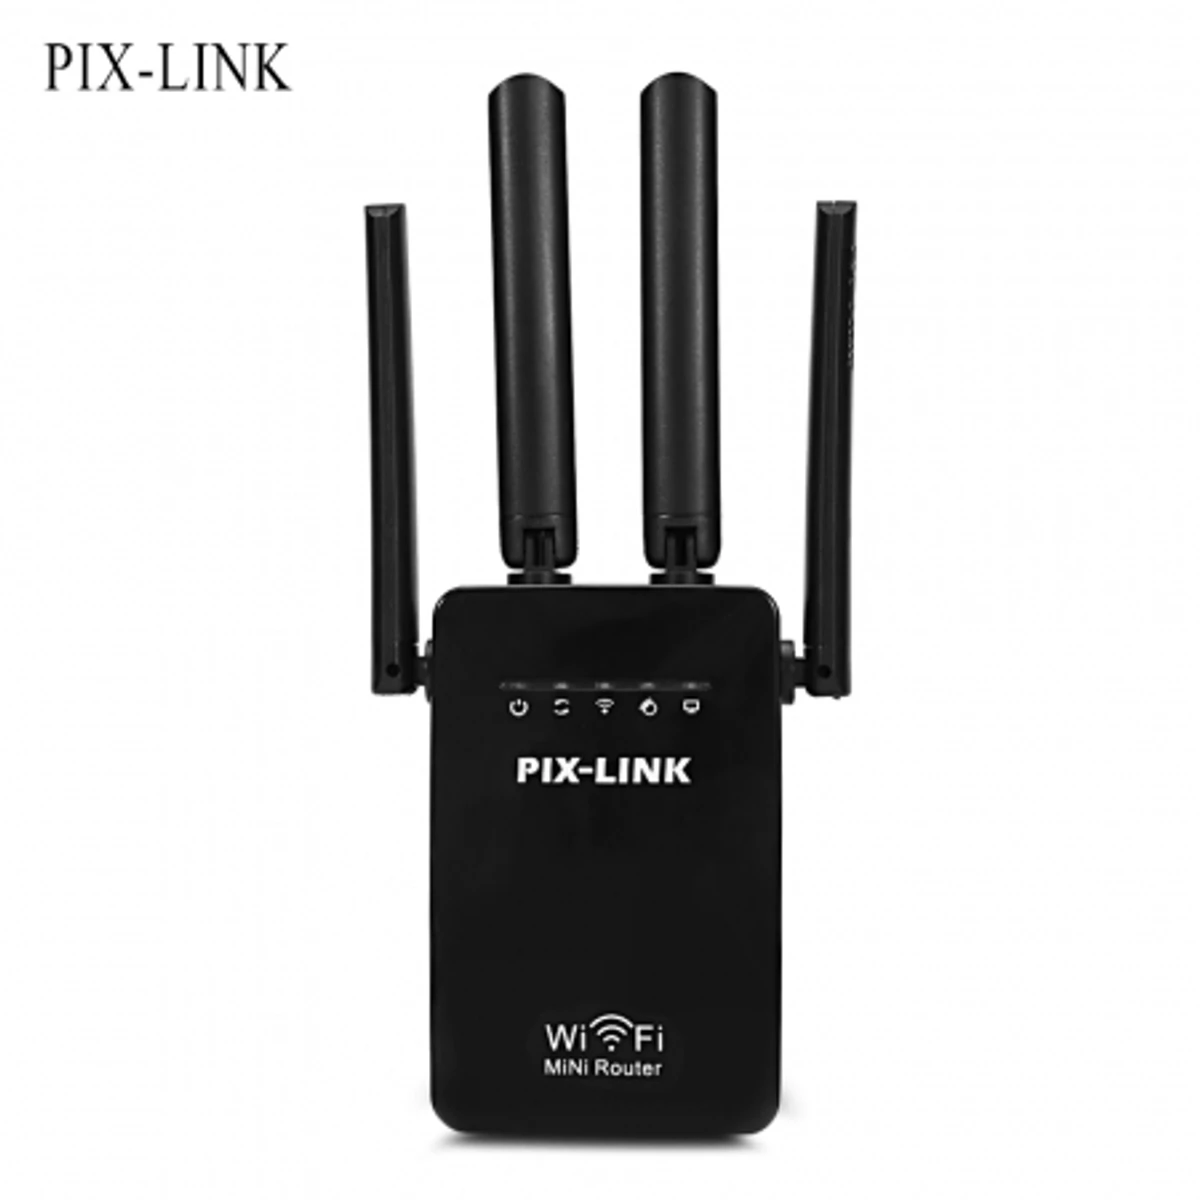 PIXLINK Mini WiFi Repeater / Router / Access Point Wi-Fi Range Extender with 4 External Antennas WPS Protection EU/US/UK/AU Plug